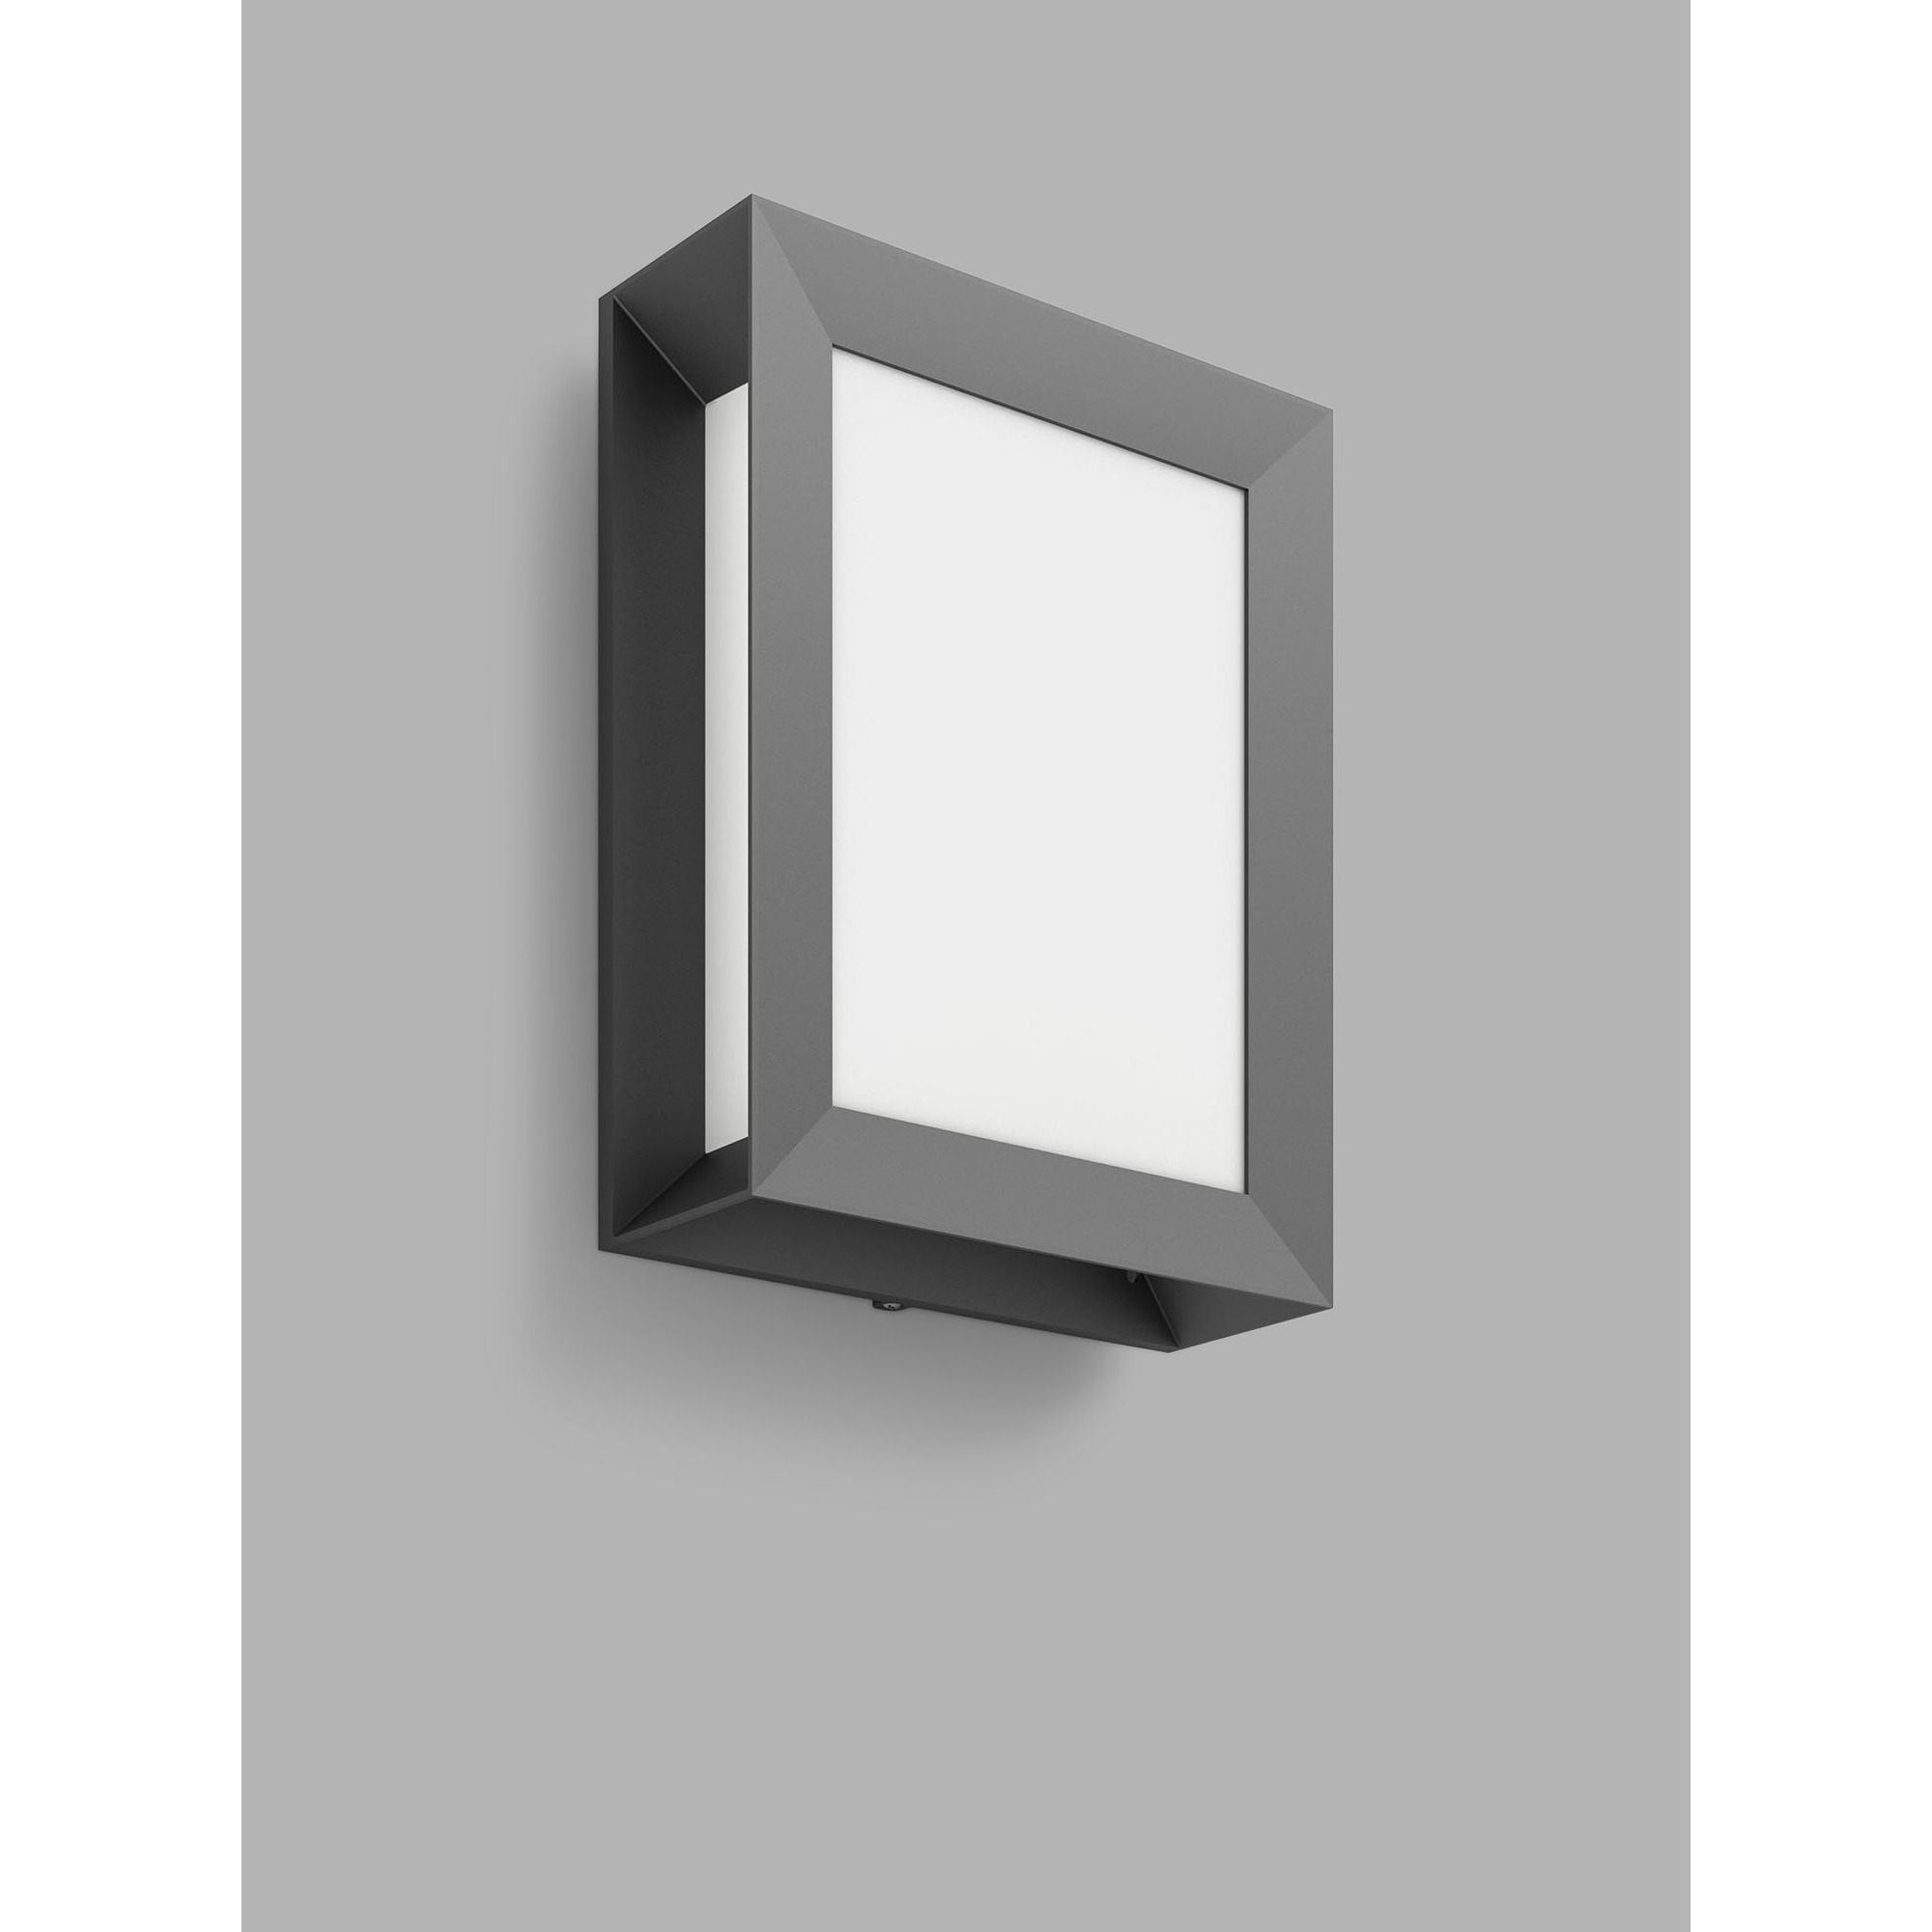 Philips Karp LED Outdoor Wall Light, Anthracite - image 1